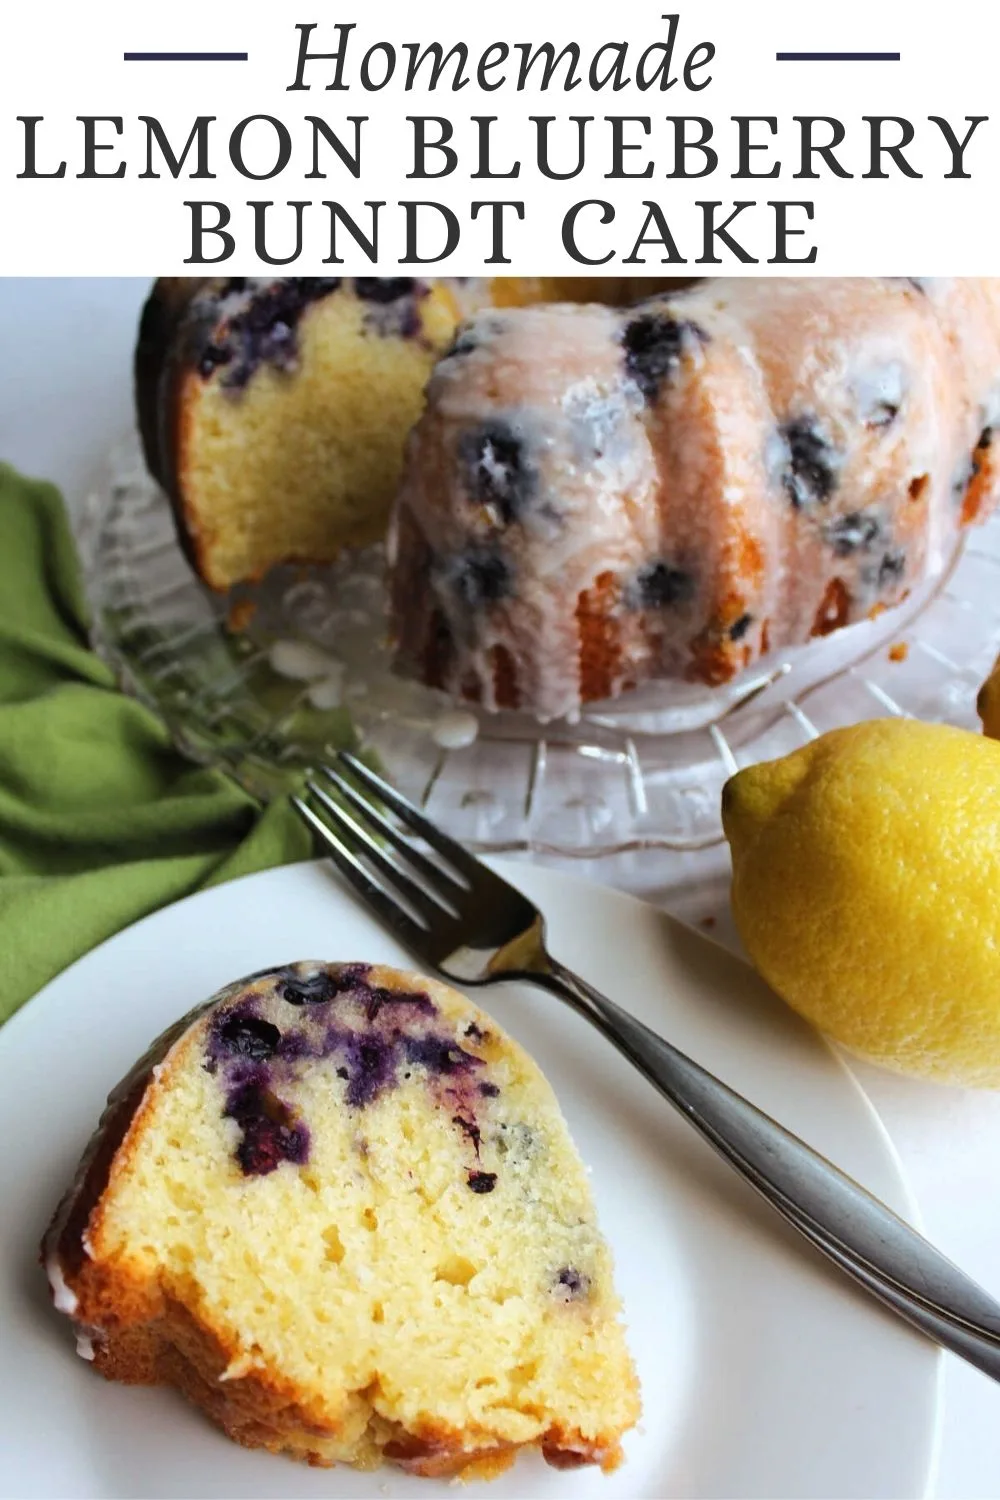 Homemade lemon blueberry Bundt cake is the perfect combination of bright citrus and fresh berries. The cake is rich and delicious with a poundcake like texture. Drizzle an easy lemon glaze on top of the cake for the perfect dessert.